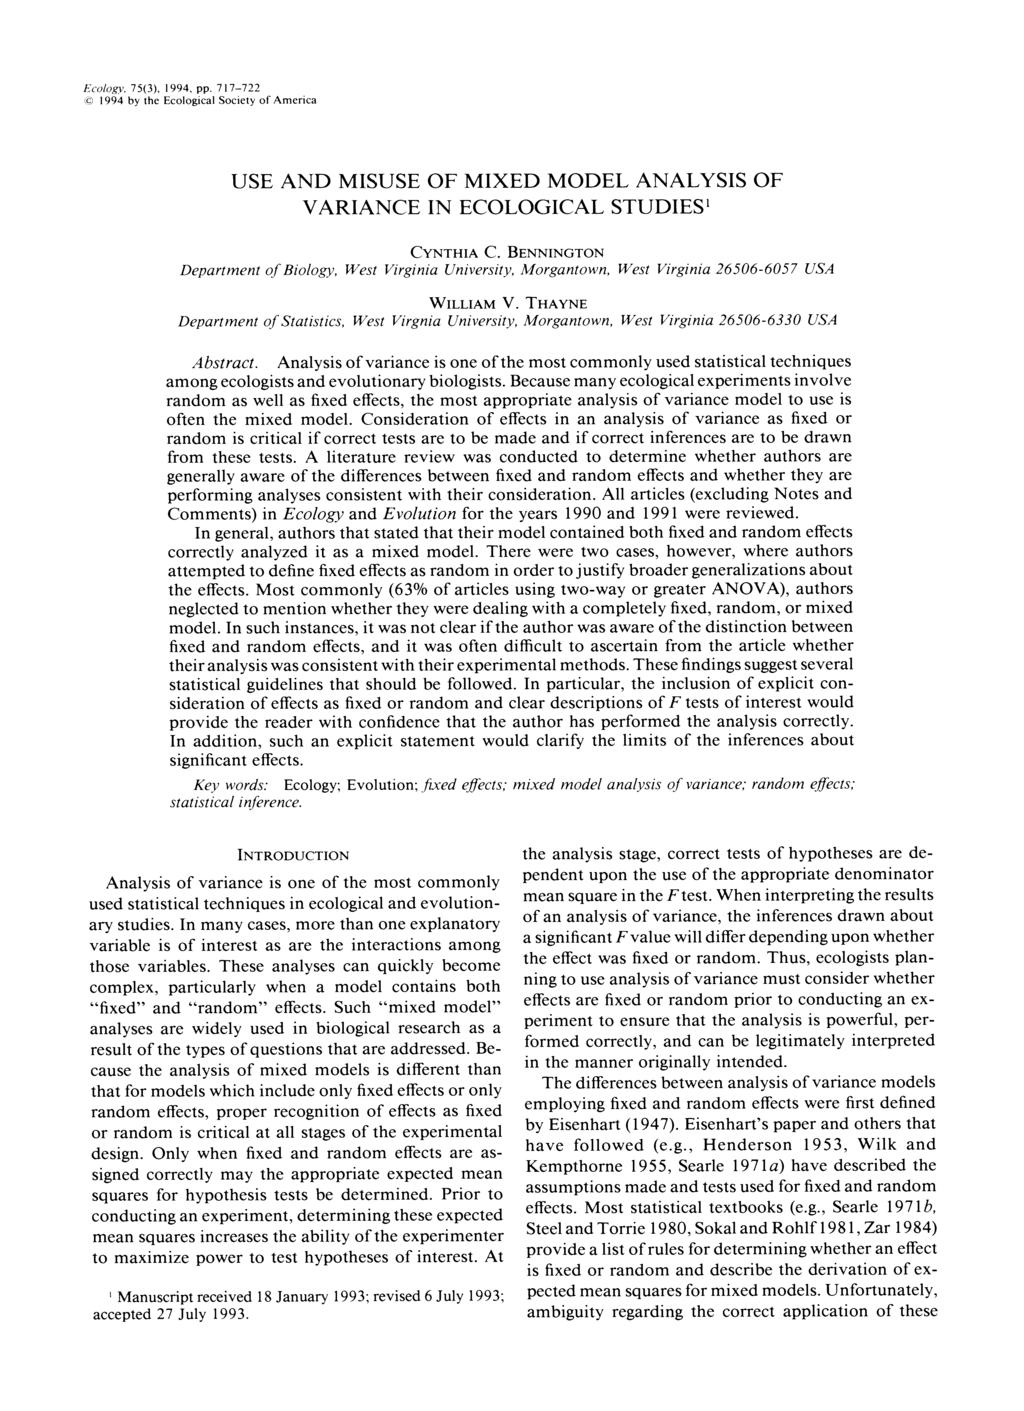 Ecology, 75(3), 1994, pp. 717-722 c) 1994 by the Ecological Society of America USE AND MISUSE OF MIXED MODEL ANALYSIS VARIANCE IN ECOLOGICAL STUDIES1 OF CYNTHIA C.